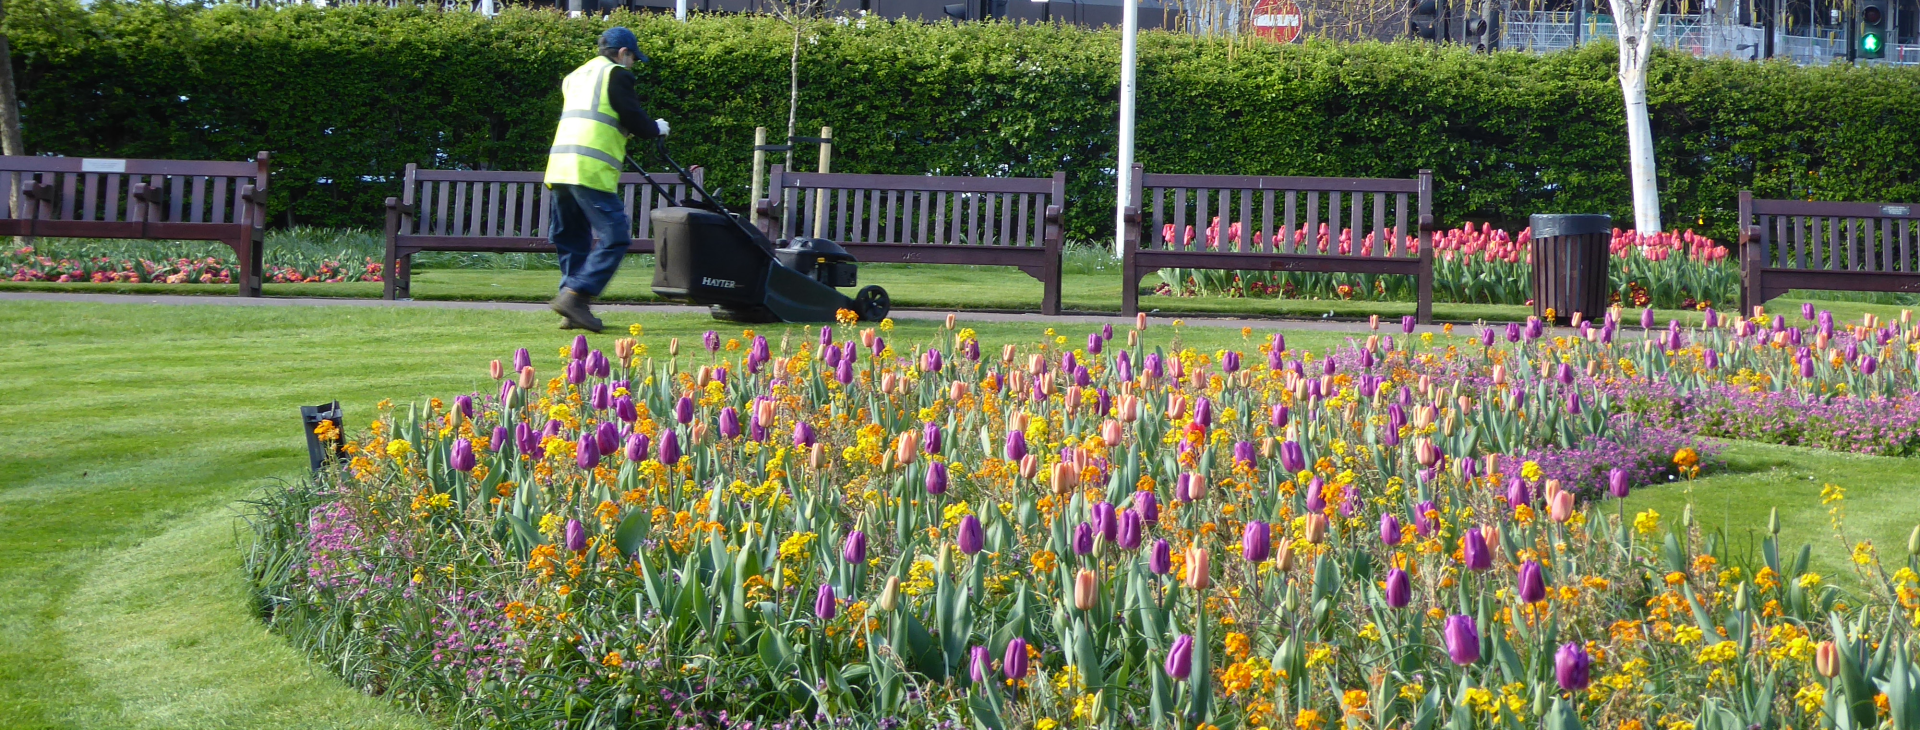 Worker mowing grass with walk along mower behind colourful bed of tulips